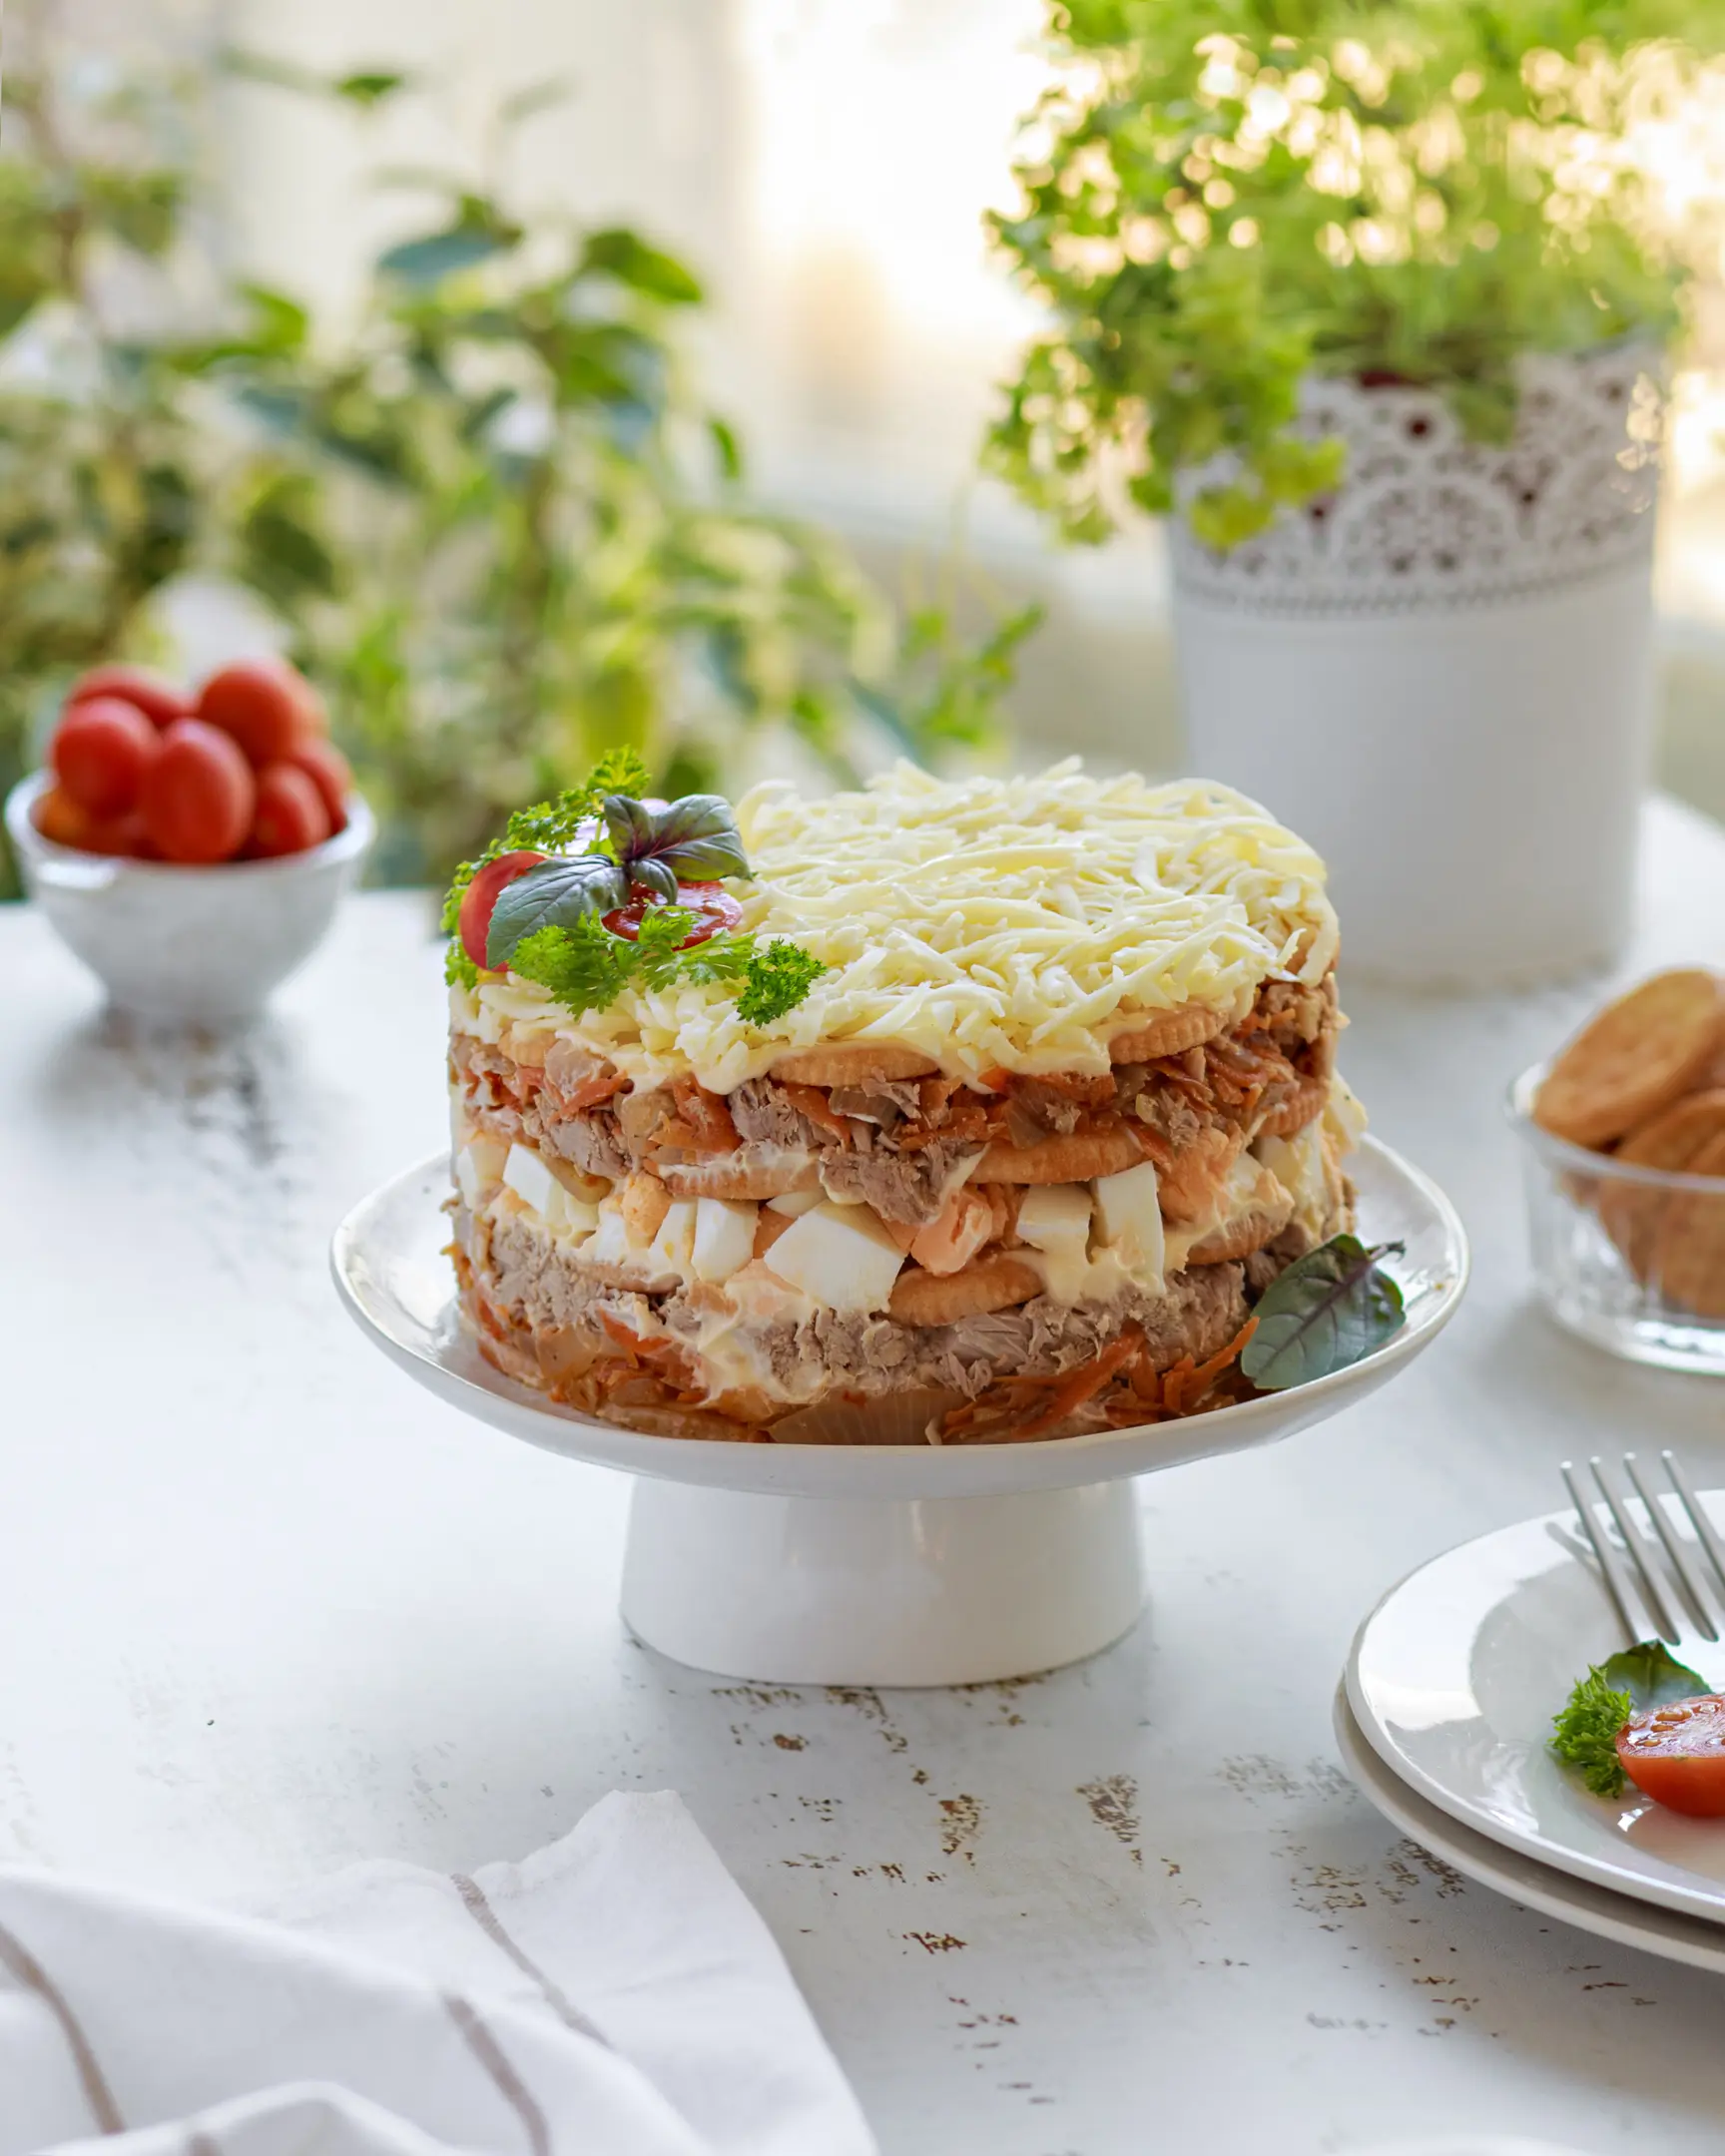 Snack cake with layers made from tuna Snack cake with layers made from tuna